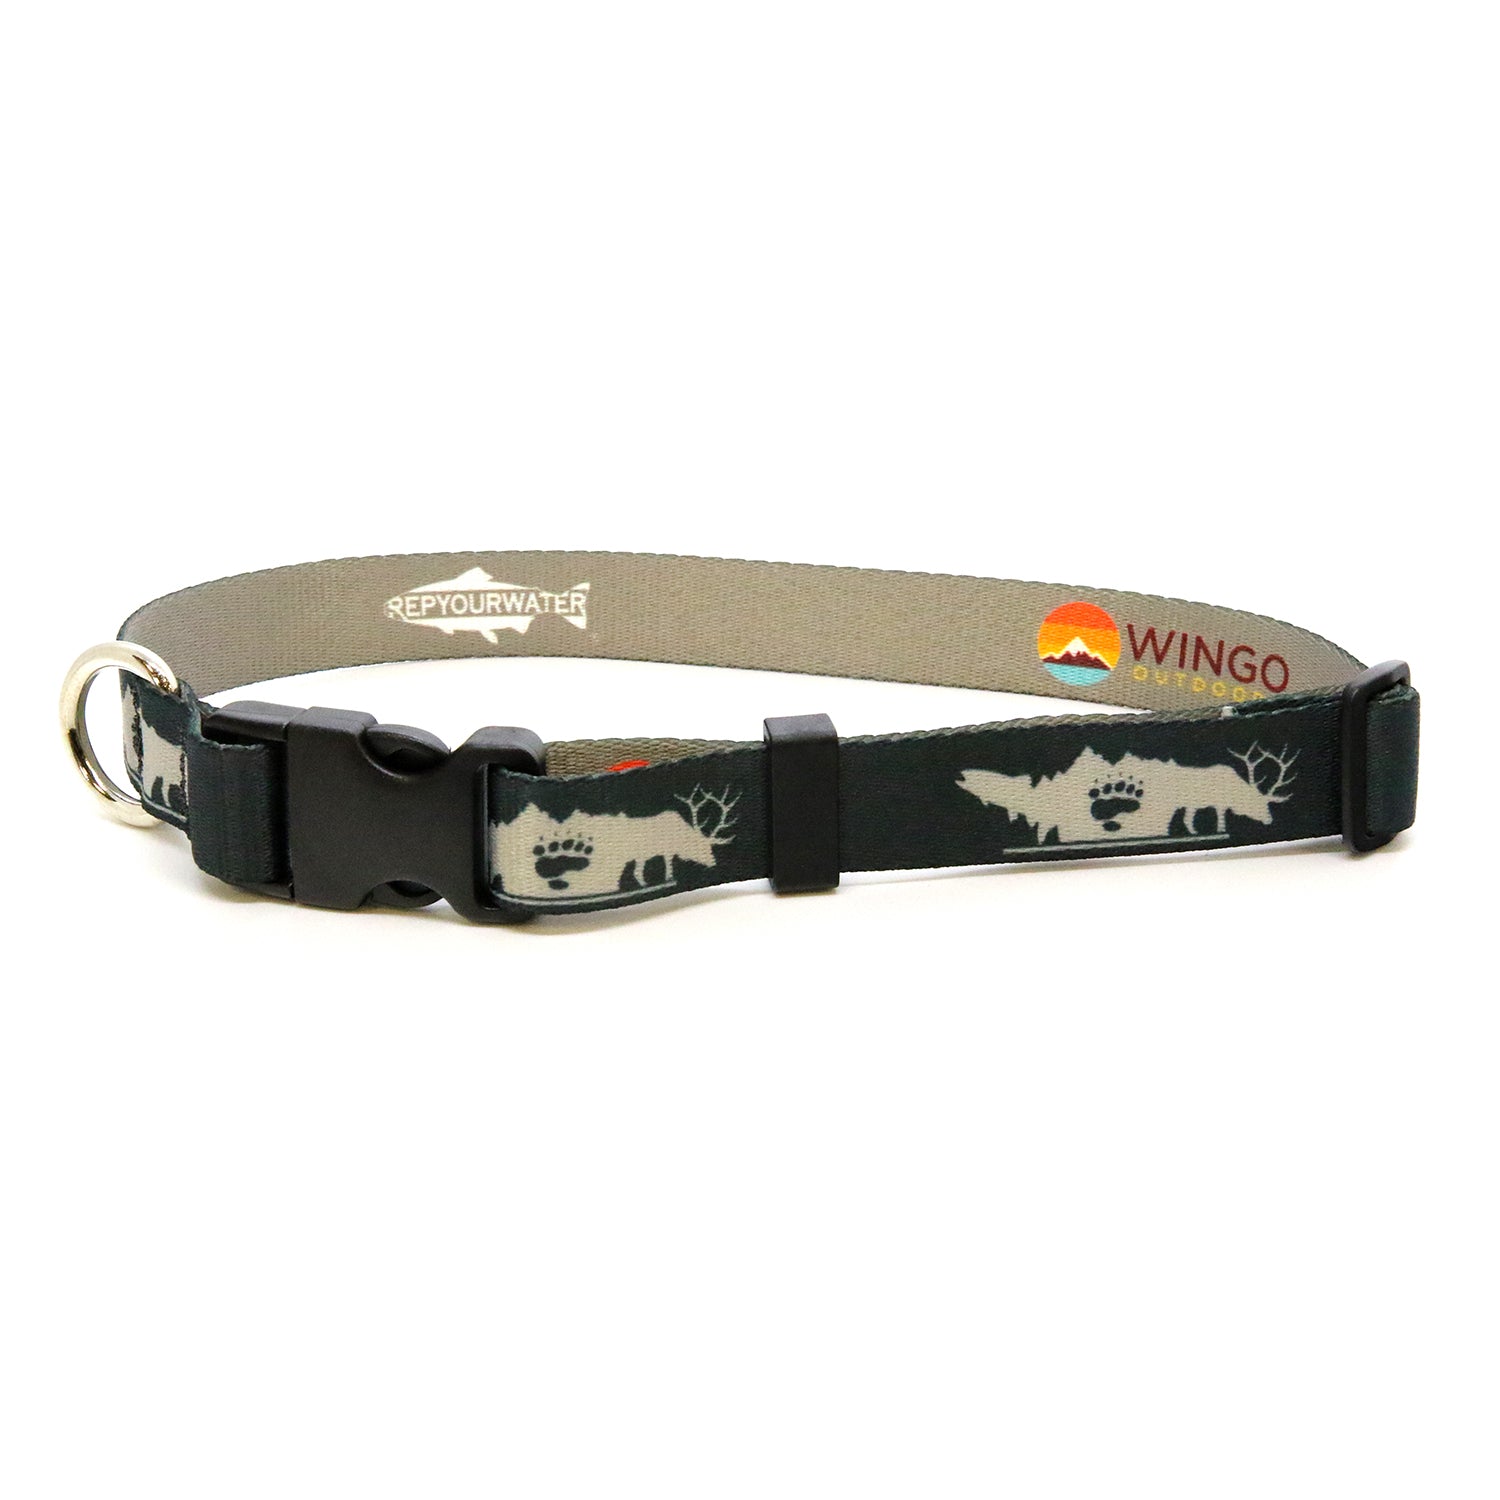 A navy dog collar with a design of a trout bear paw and elk is shown